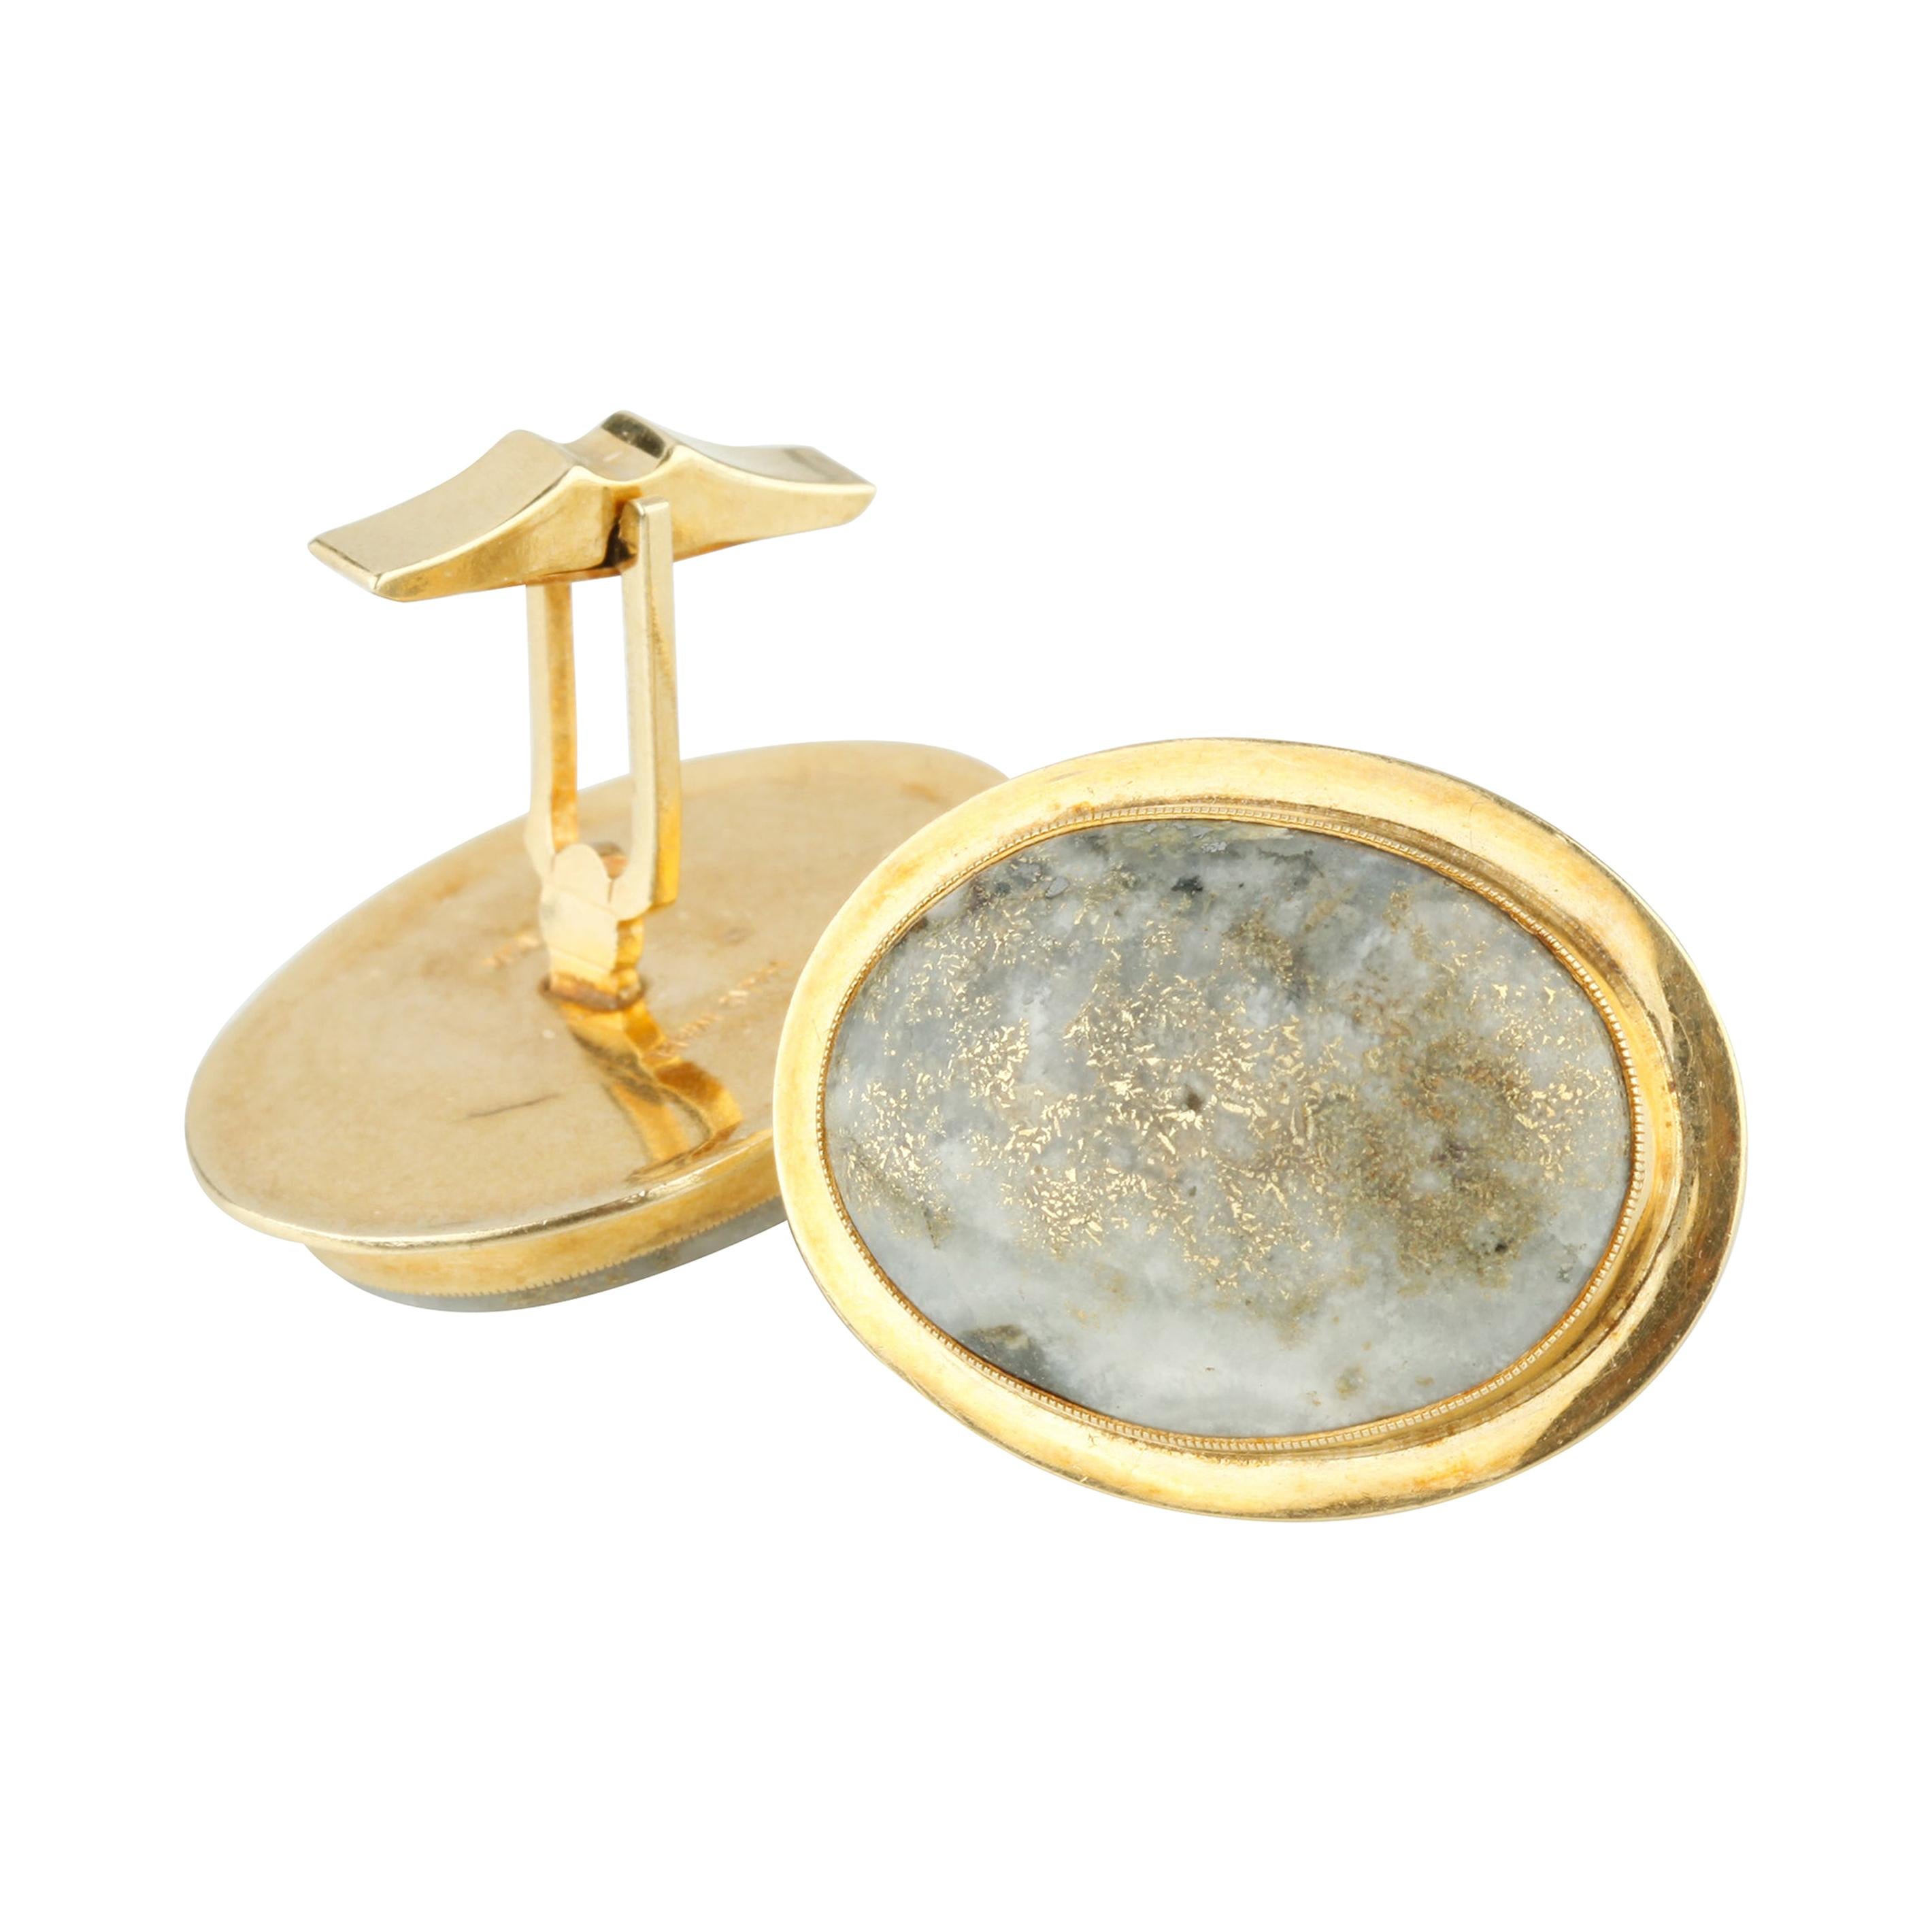 39 Carat Rock Crystal Cabochon Cufflinks in Yellow Gold For Sale